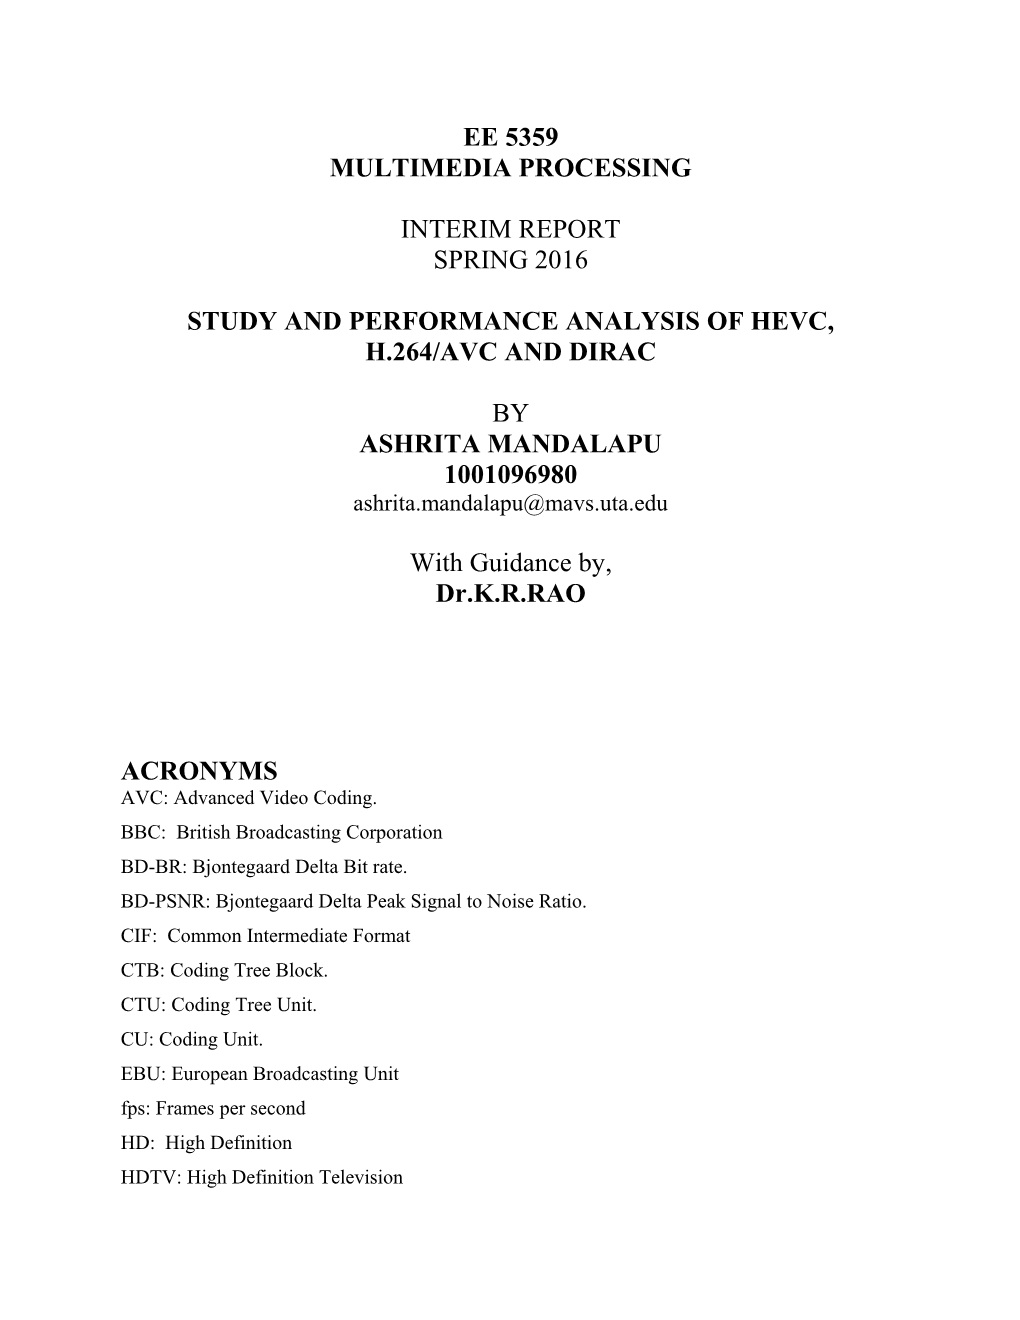 Study and Performance Analysis of Hevc, H.264/Avc and Dirac